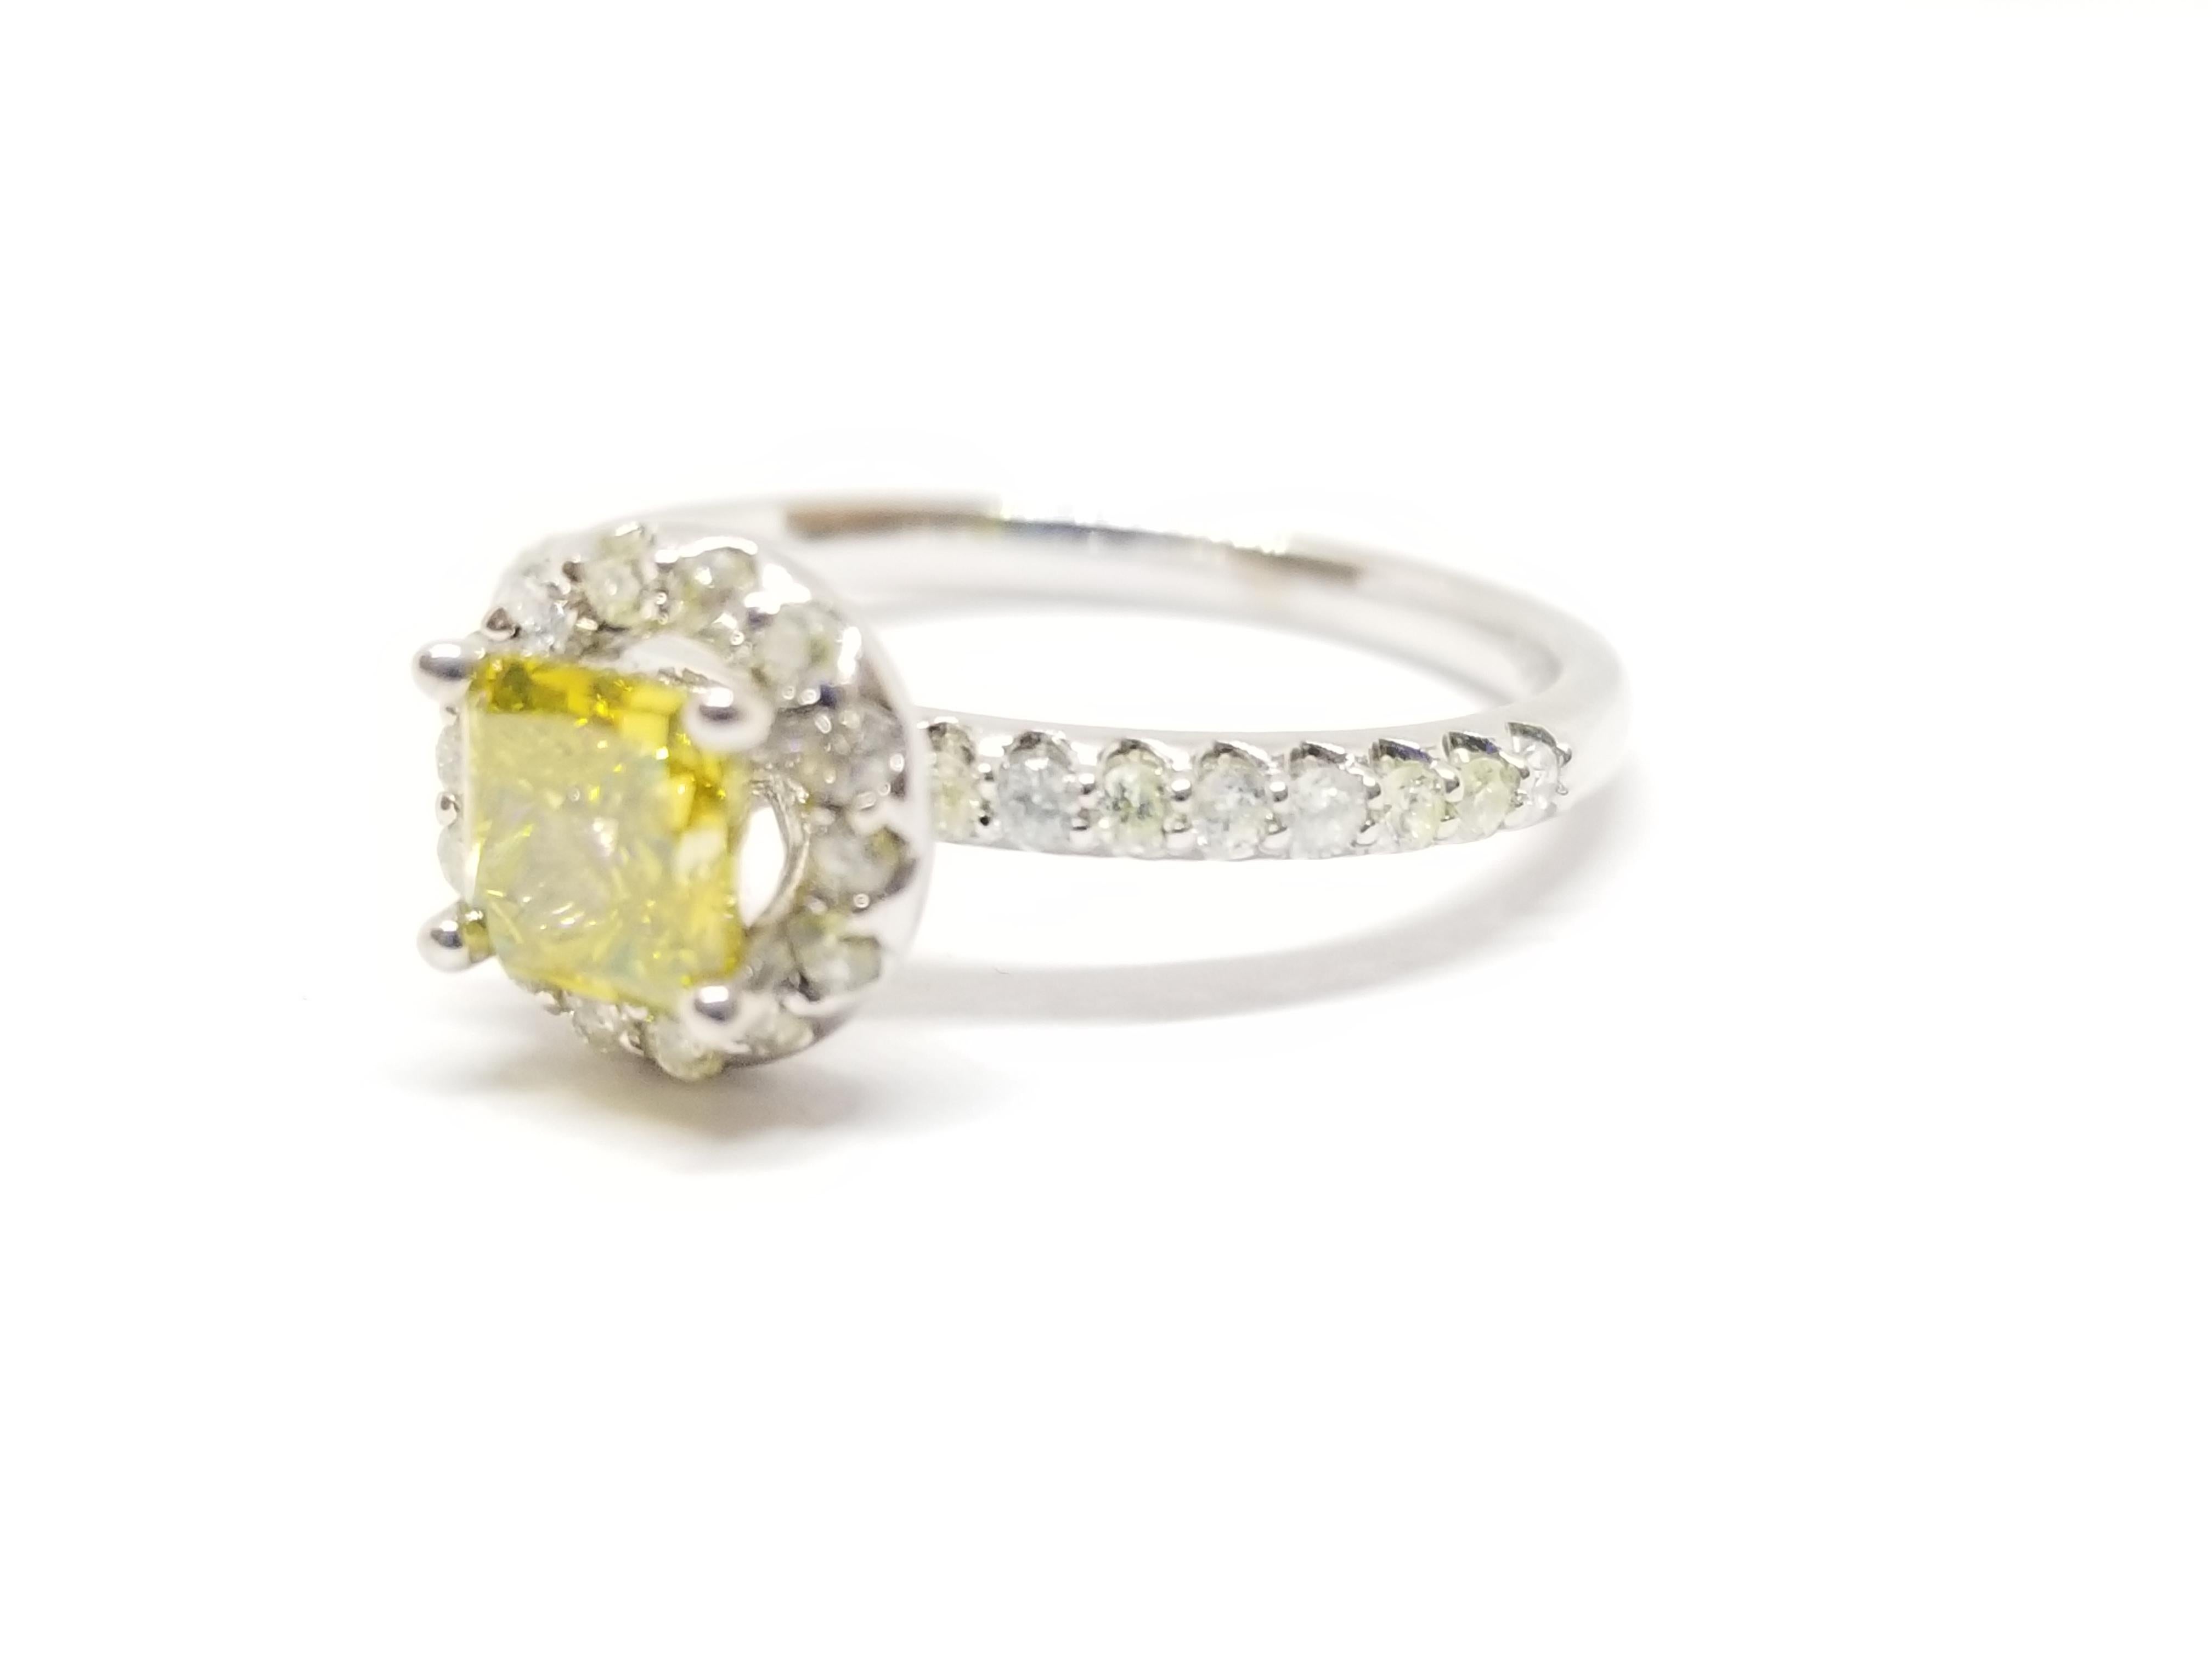 GIA 0.78 Carat Fancy Vivid Yellow Radiant Diamond Ring 14K White Gold In New Condition For Sale In Great Neck, NY